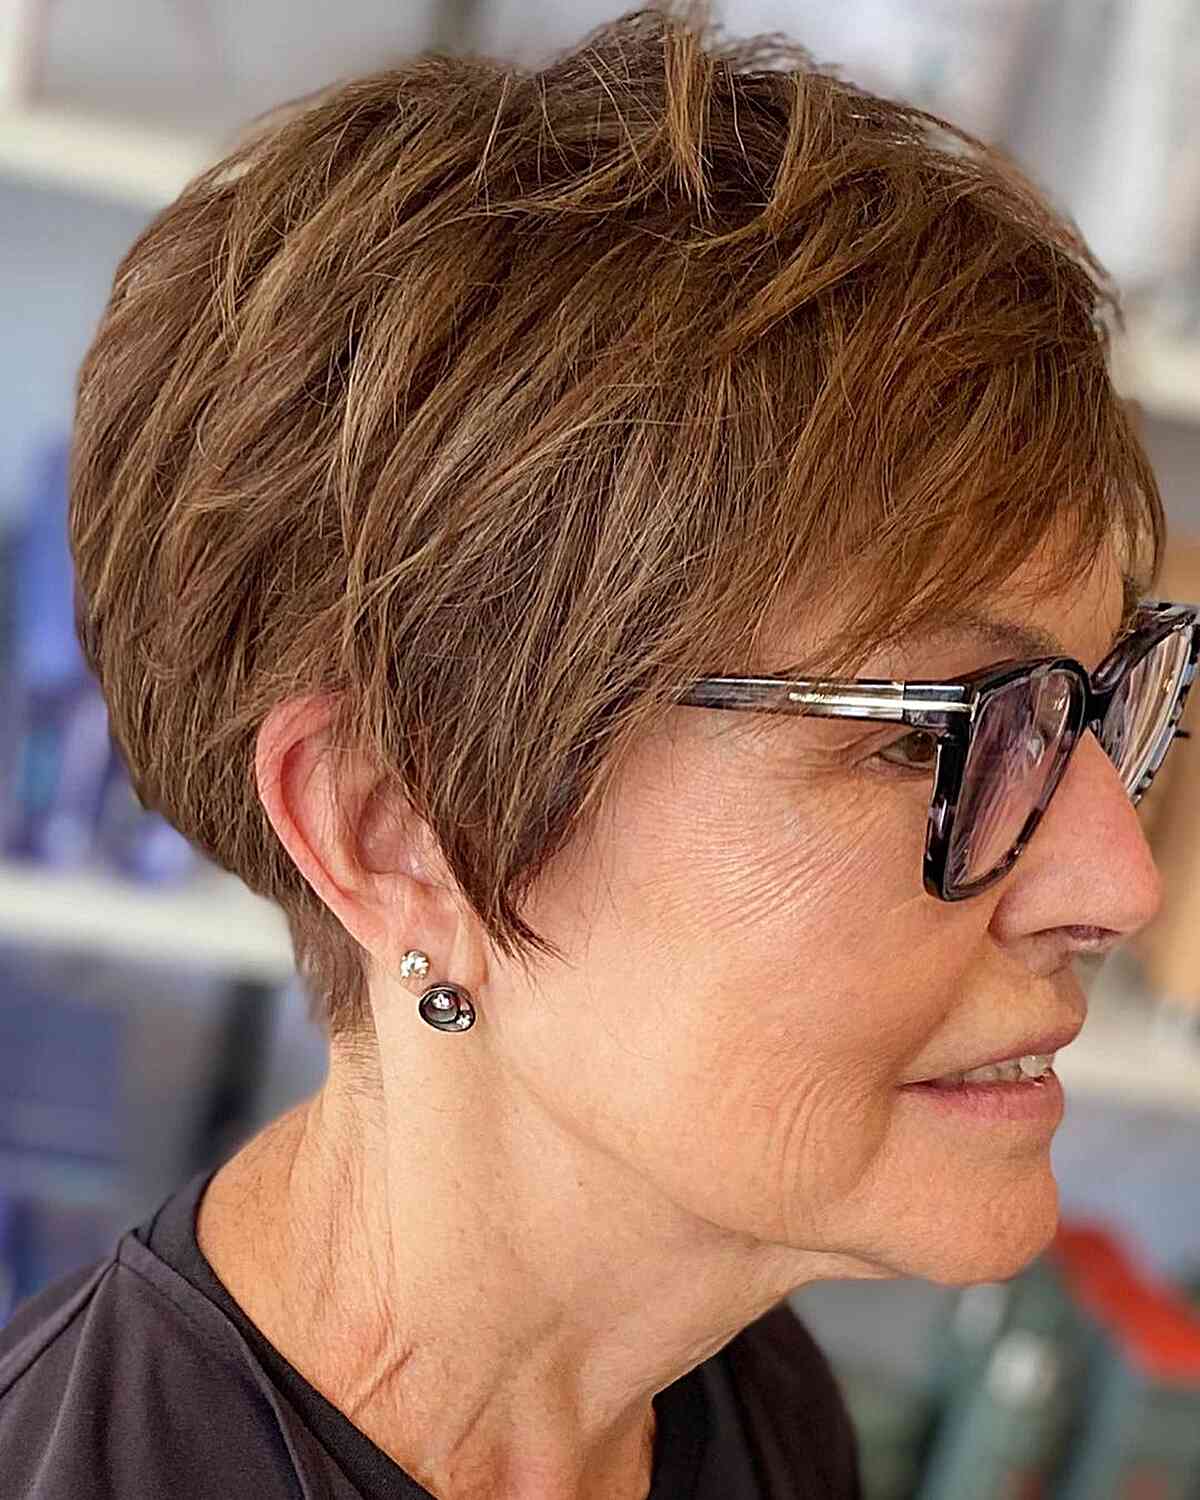 beau brouillette share hairstyles for over 50 with glasses photos